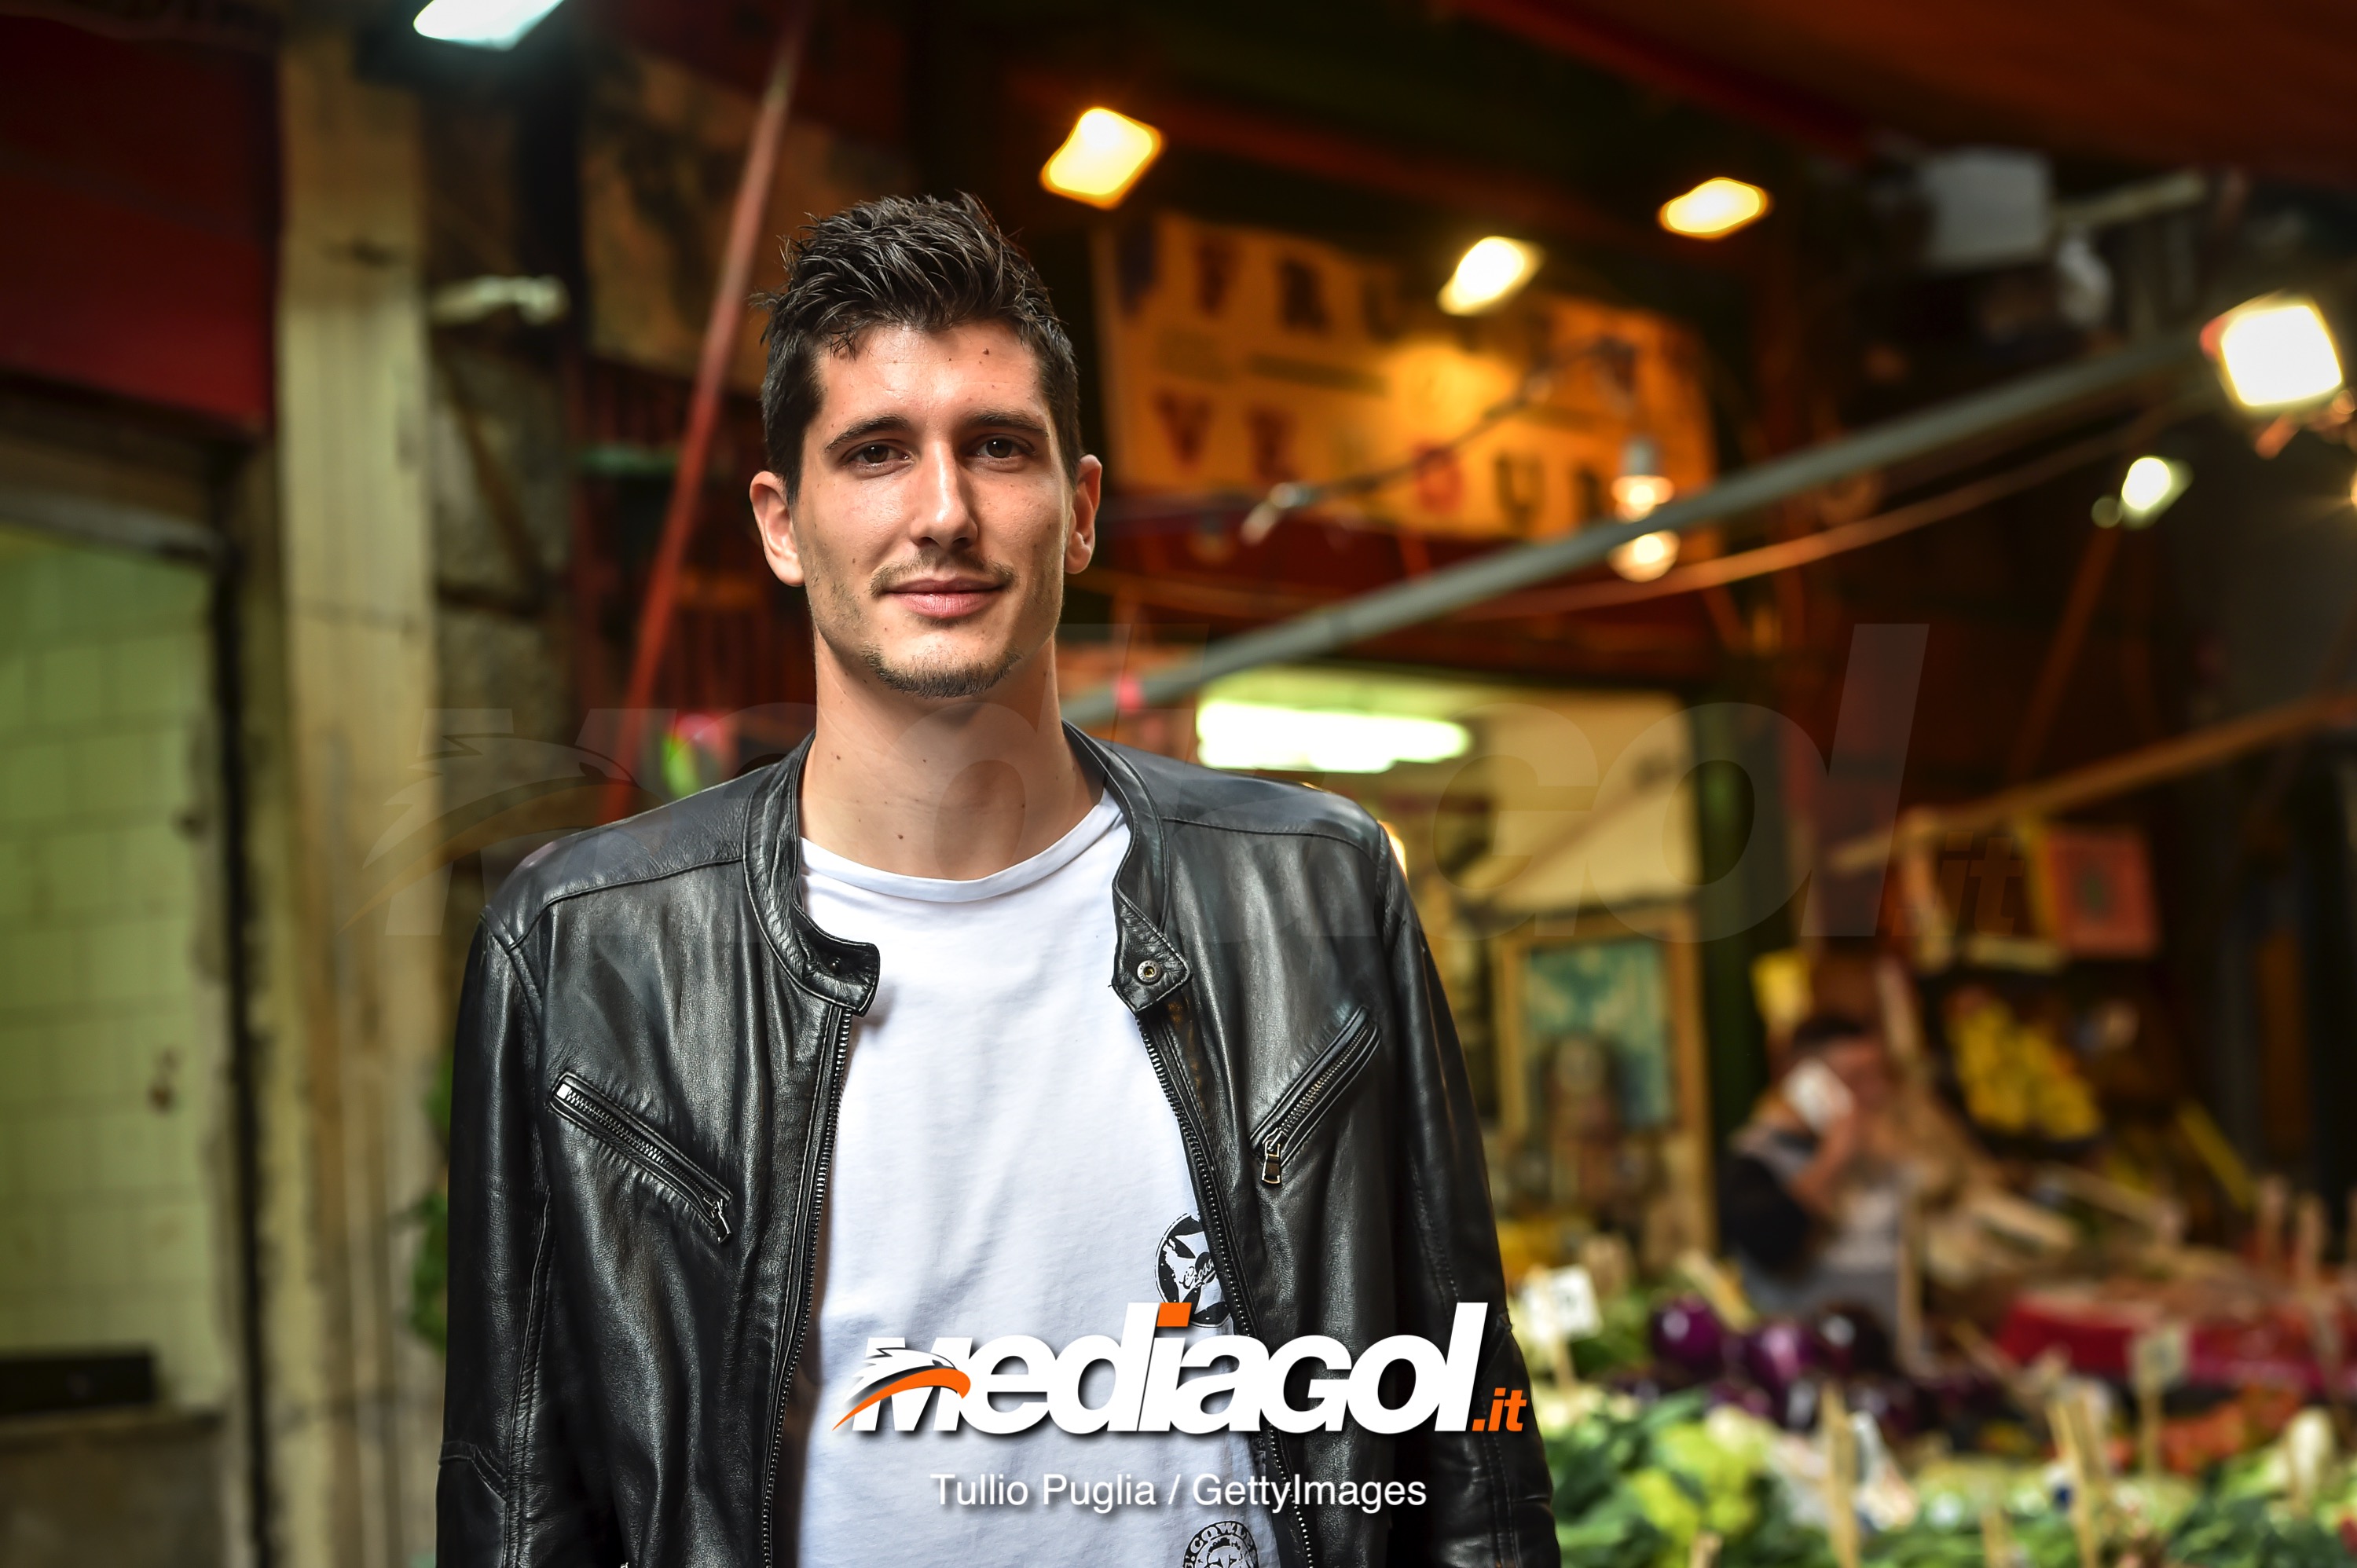 PALERMO, ITALY - DECEMBER 19:  Stefano Moreo player of US Citta' di Palermo poses for a photo during a visit to the Vucciria market on December 19, 2018 in Palermo, Italy.  (Photo by Tullio M. Puglia/Getty Images)